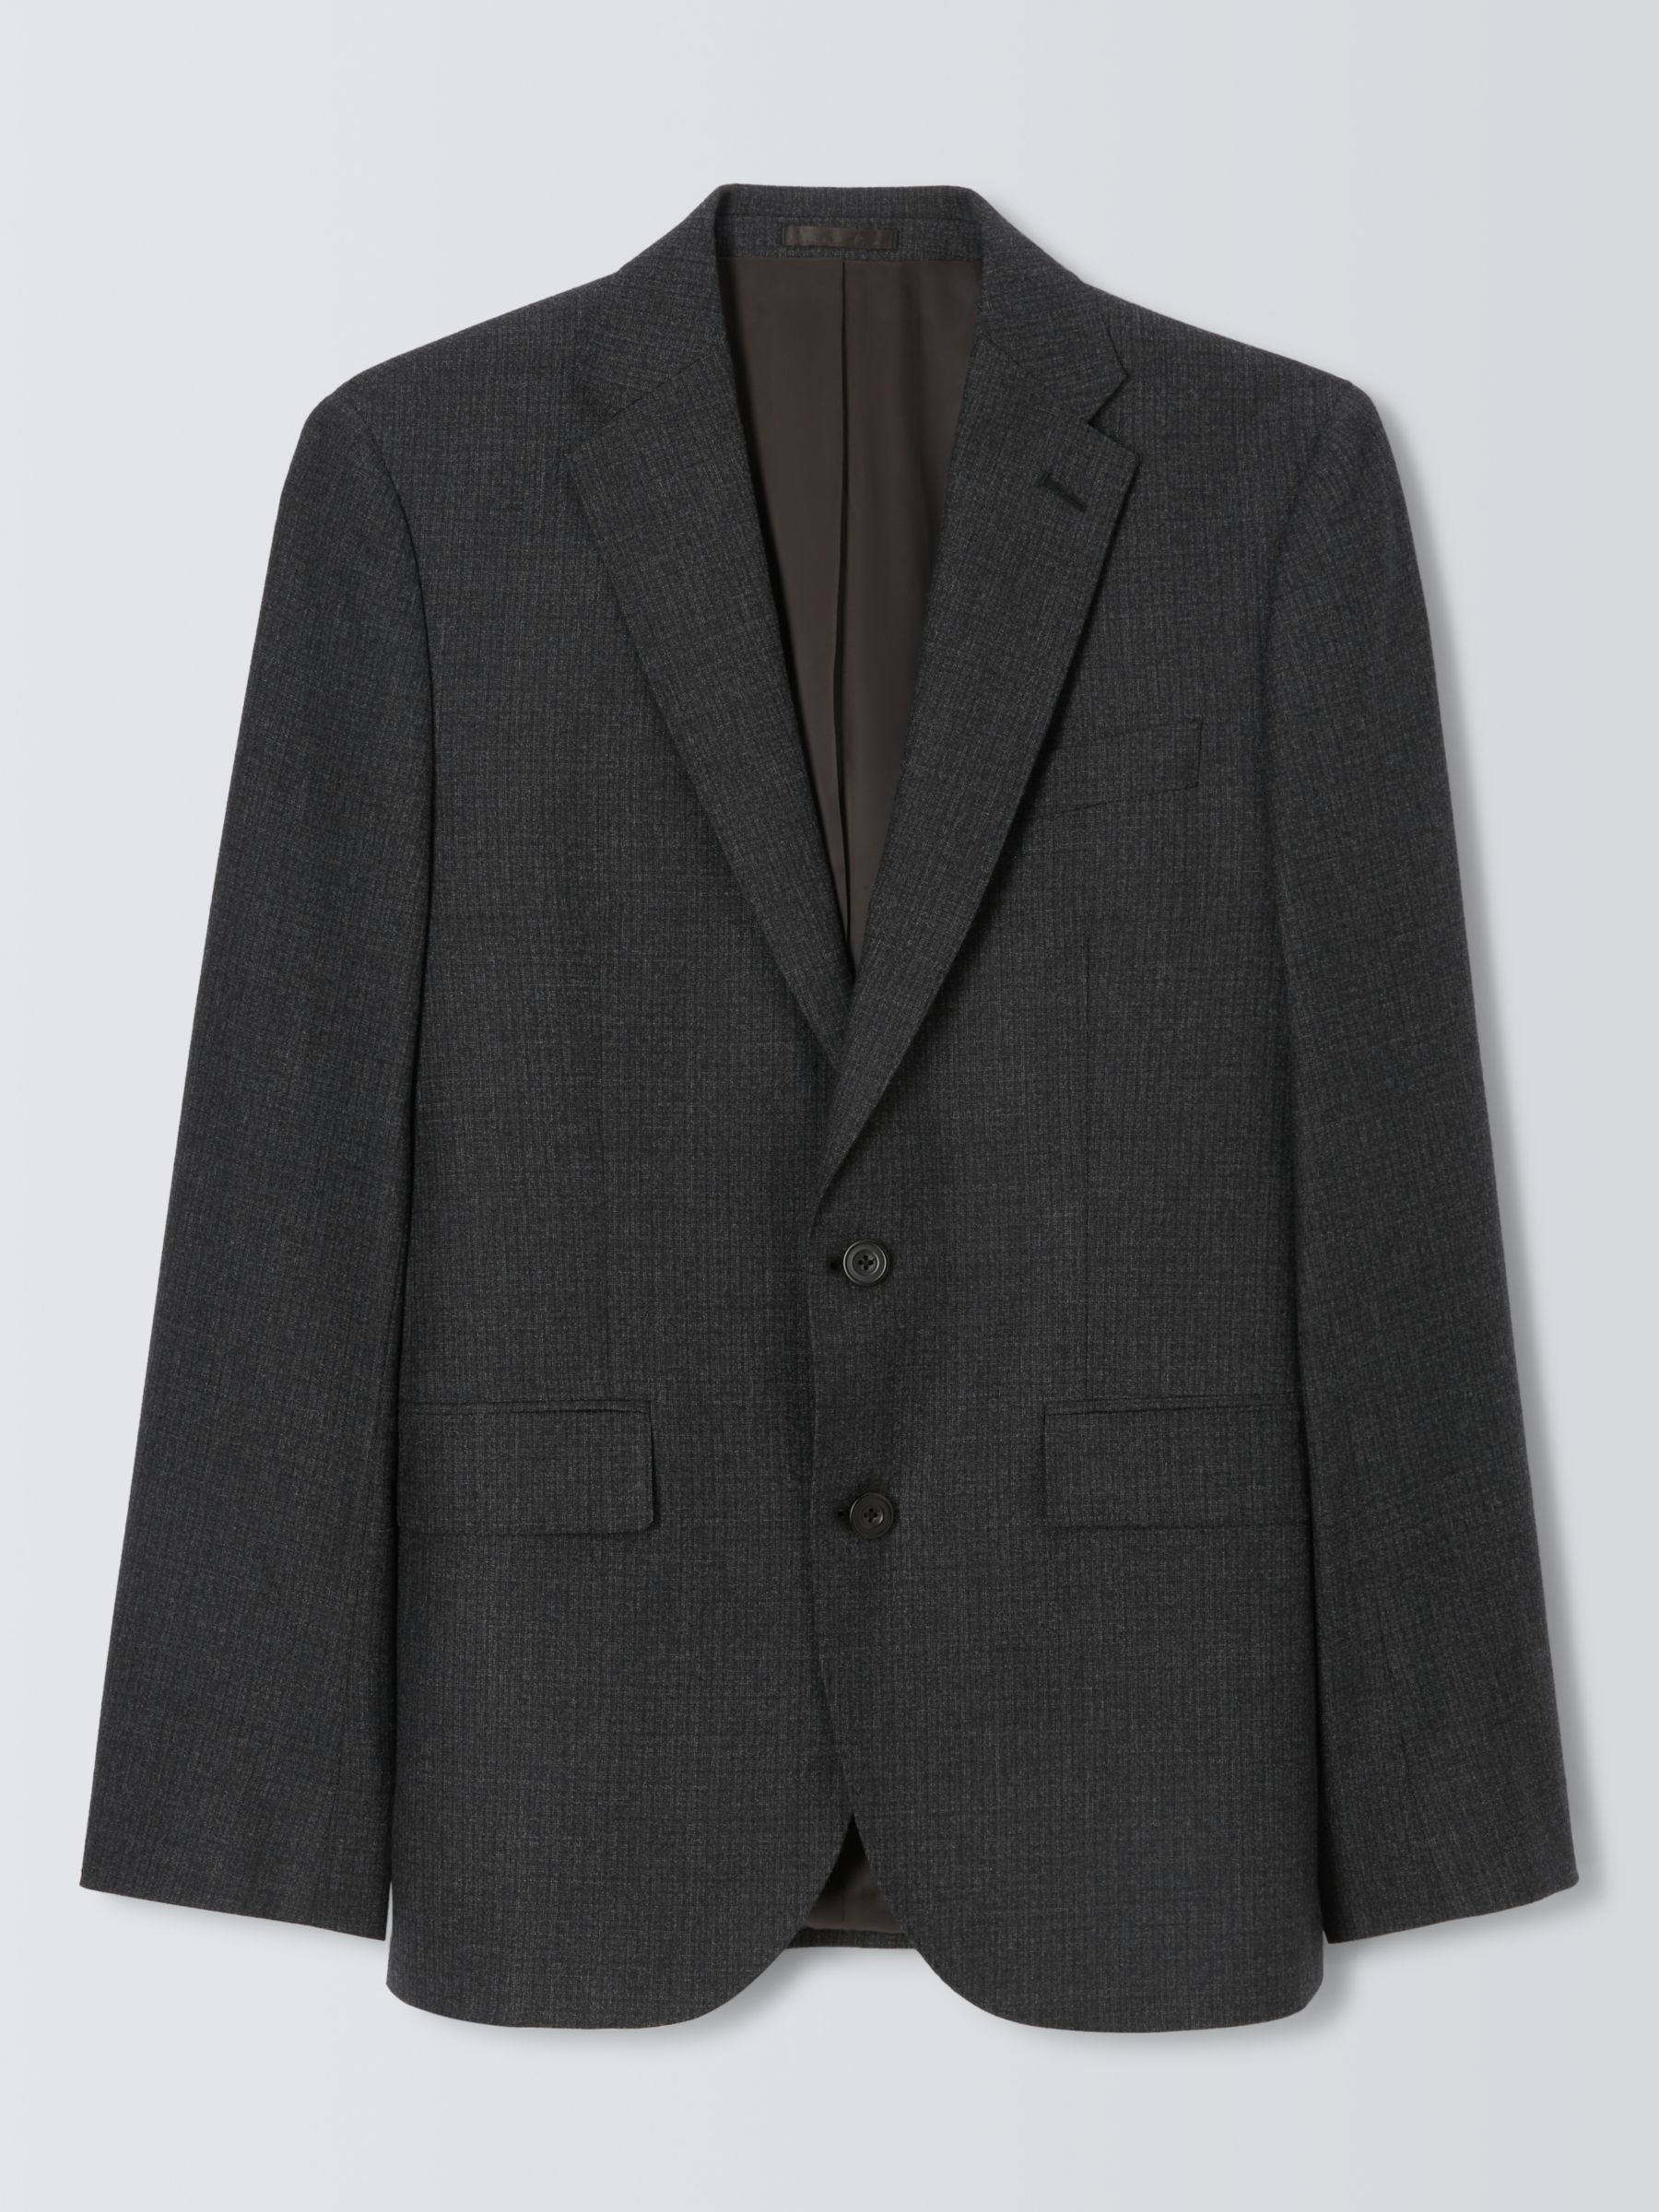 John Lewis Zegna Recycled Wool Regular Fit Suit Jacket, Charcoal at ...